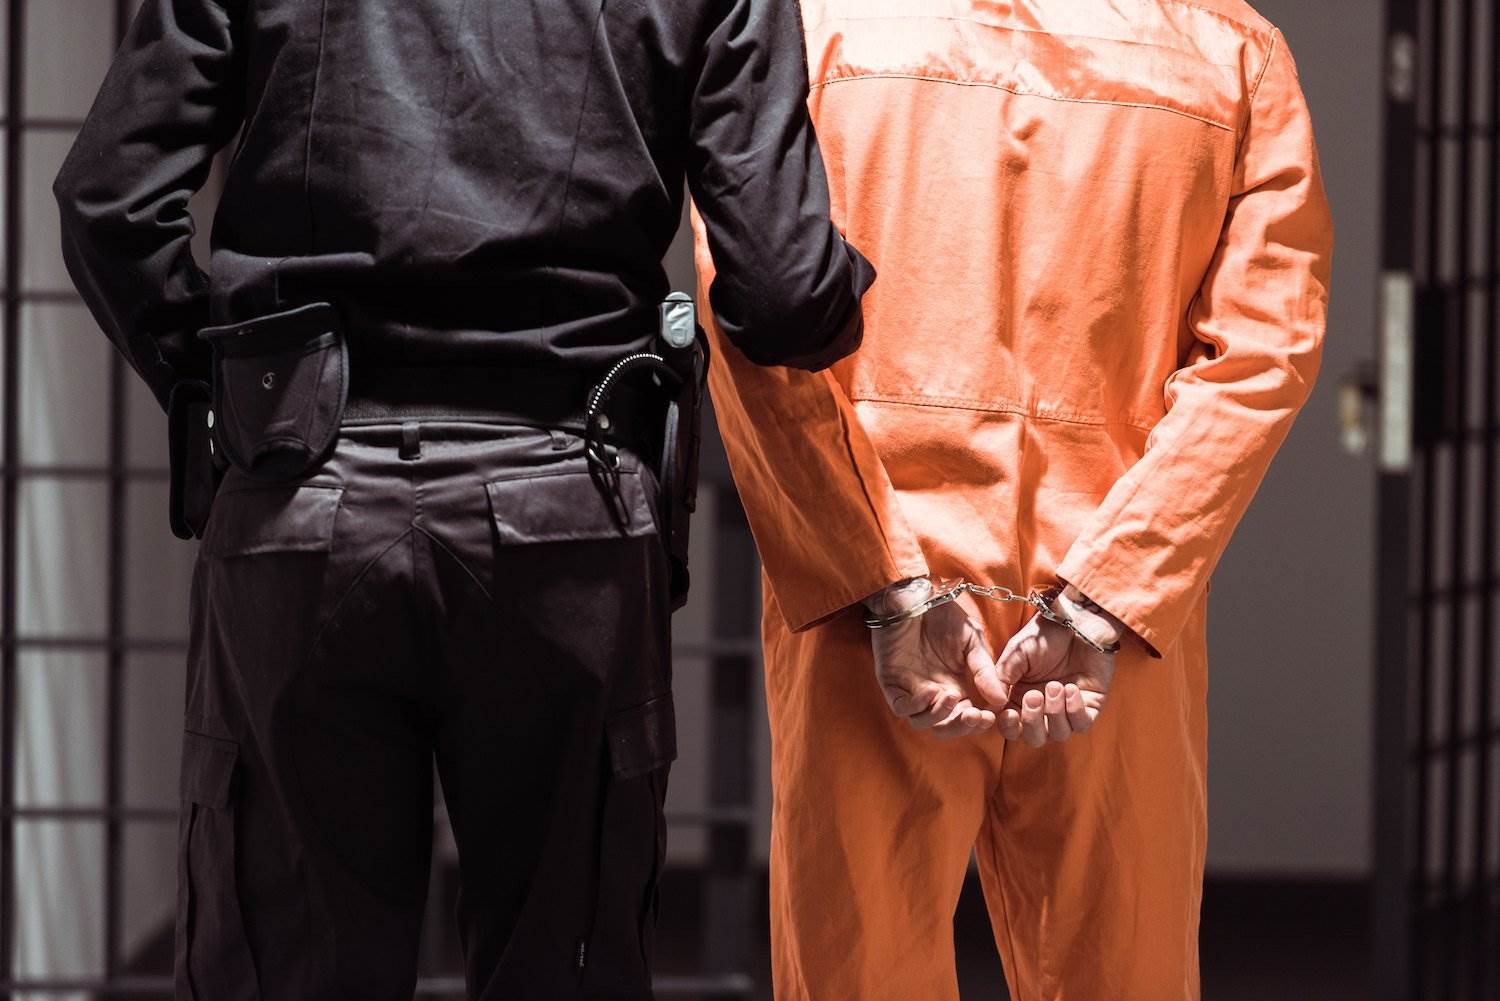 A prisoner being led away by a guard